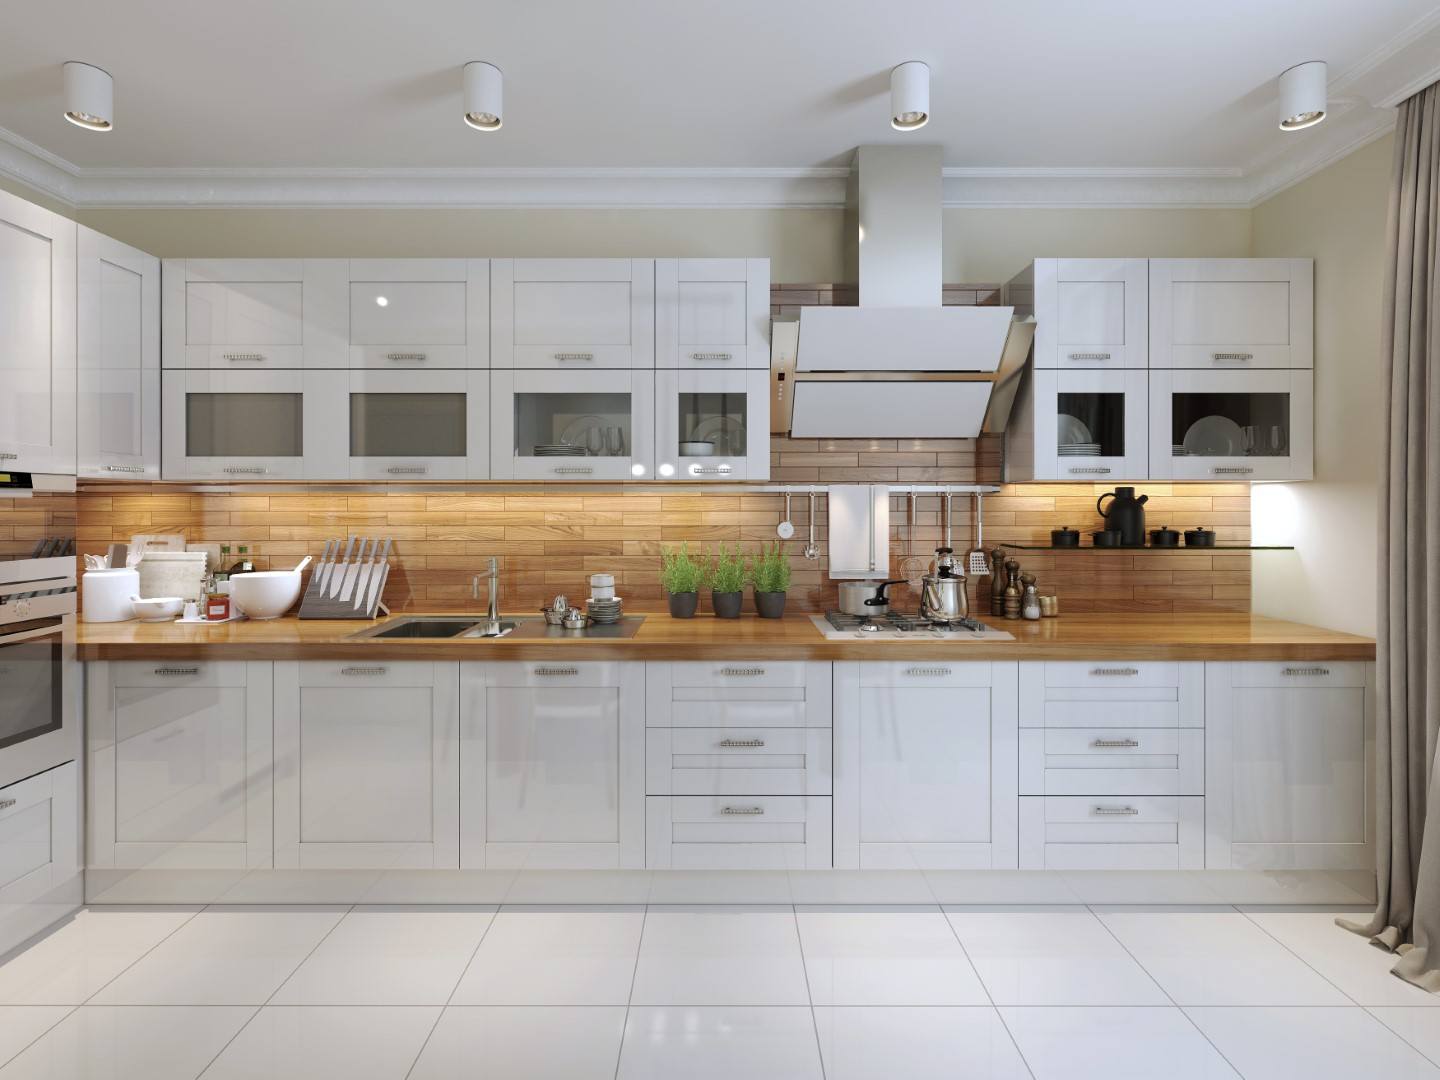 Top 4 Reasons To Use Cabinet Refinishing For Your Kitchen Remodeling